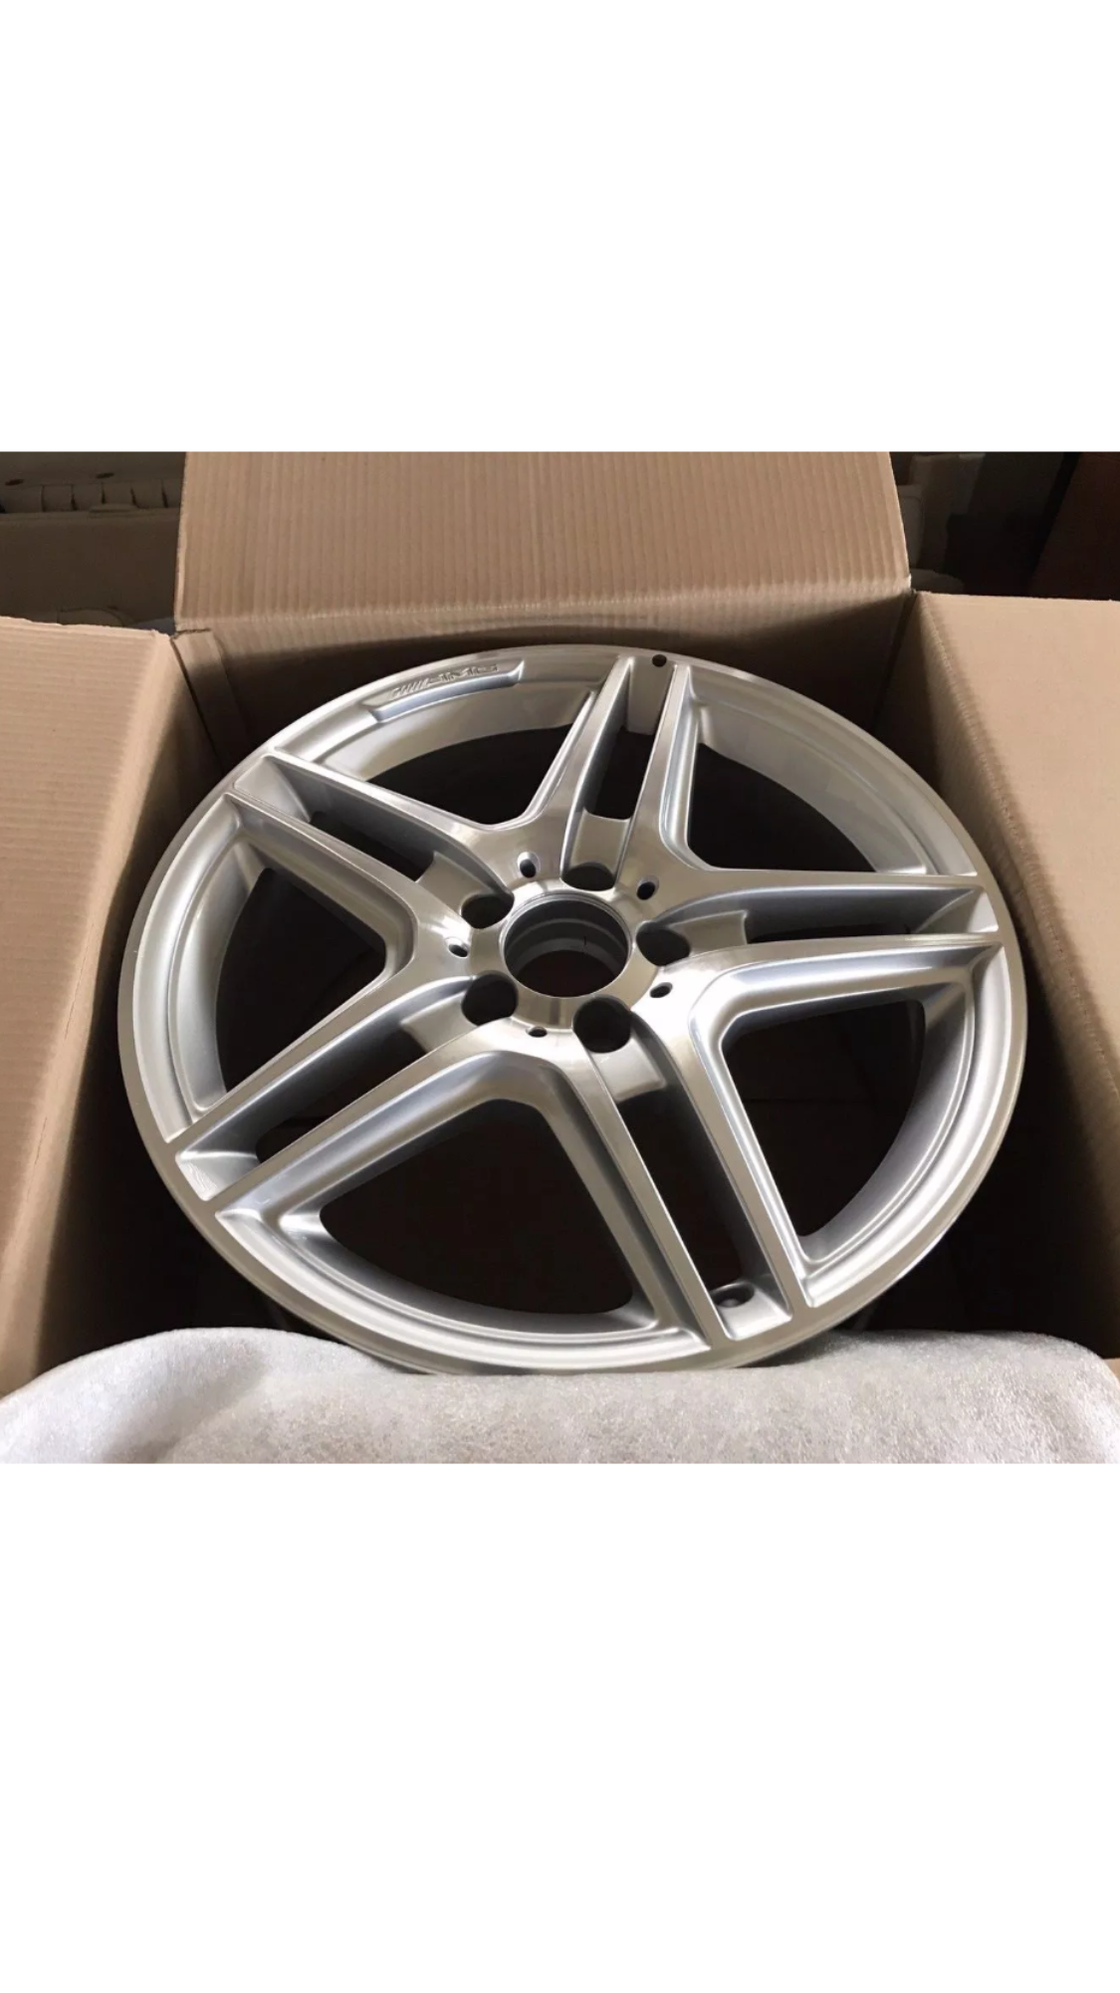 Wheels and Tires/Axles - E350 AMG 18" wheel - Used - 2010 to 2017 Mercedes-Benz E350 - Daimond Bar, CA 91765, United States